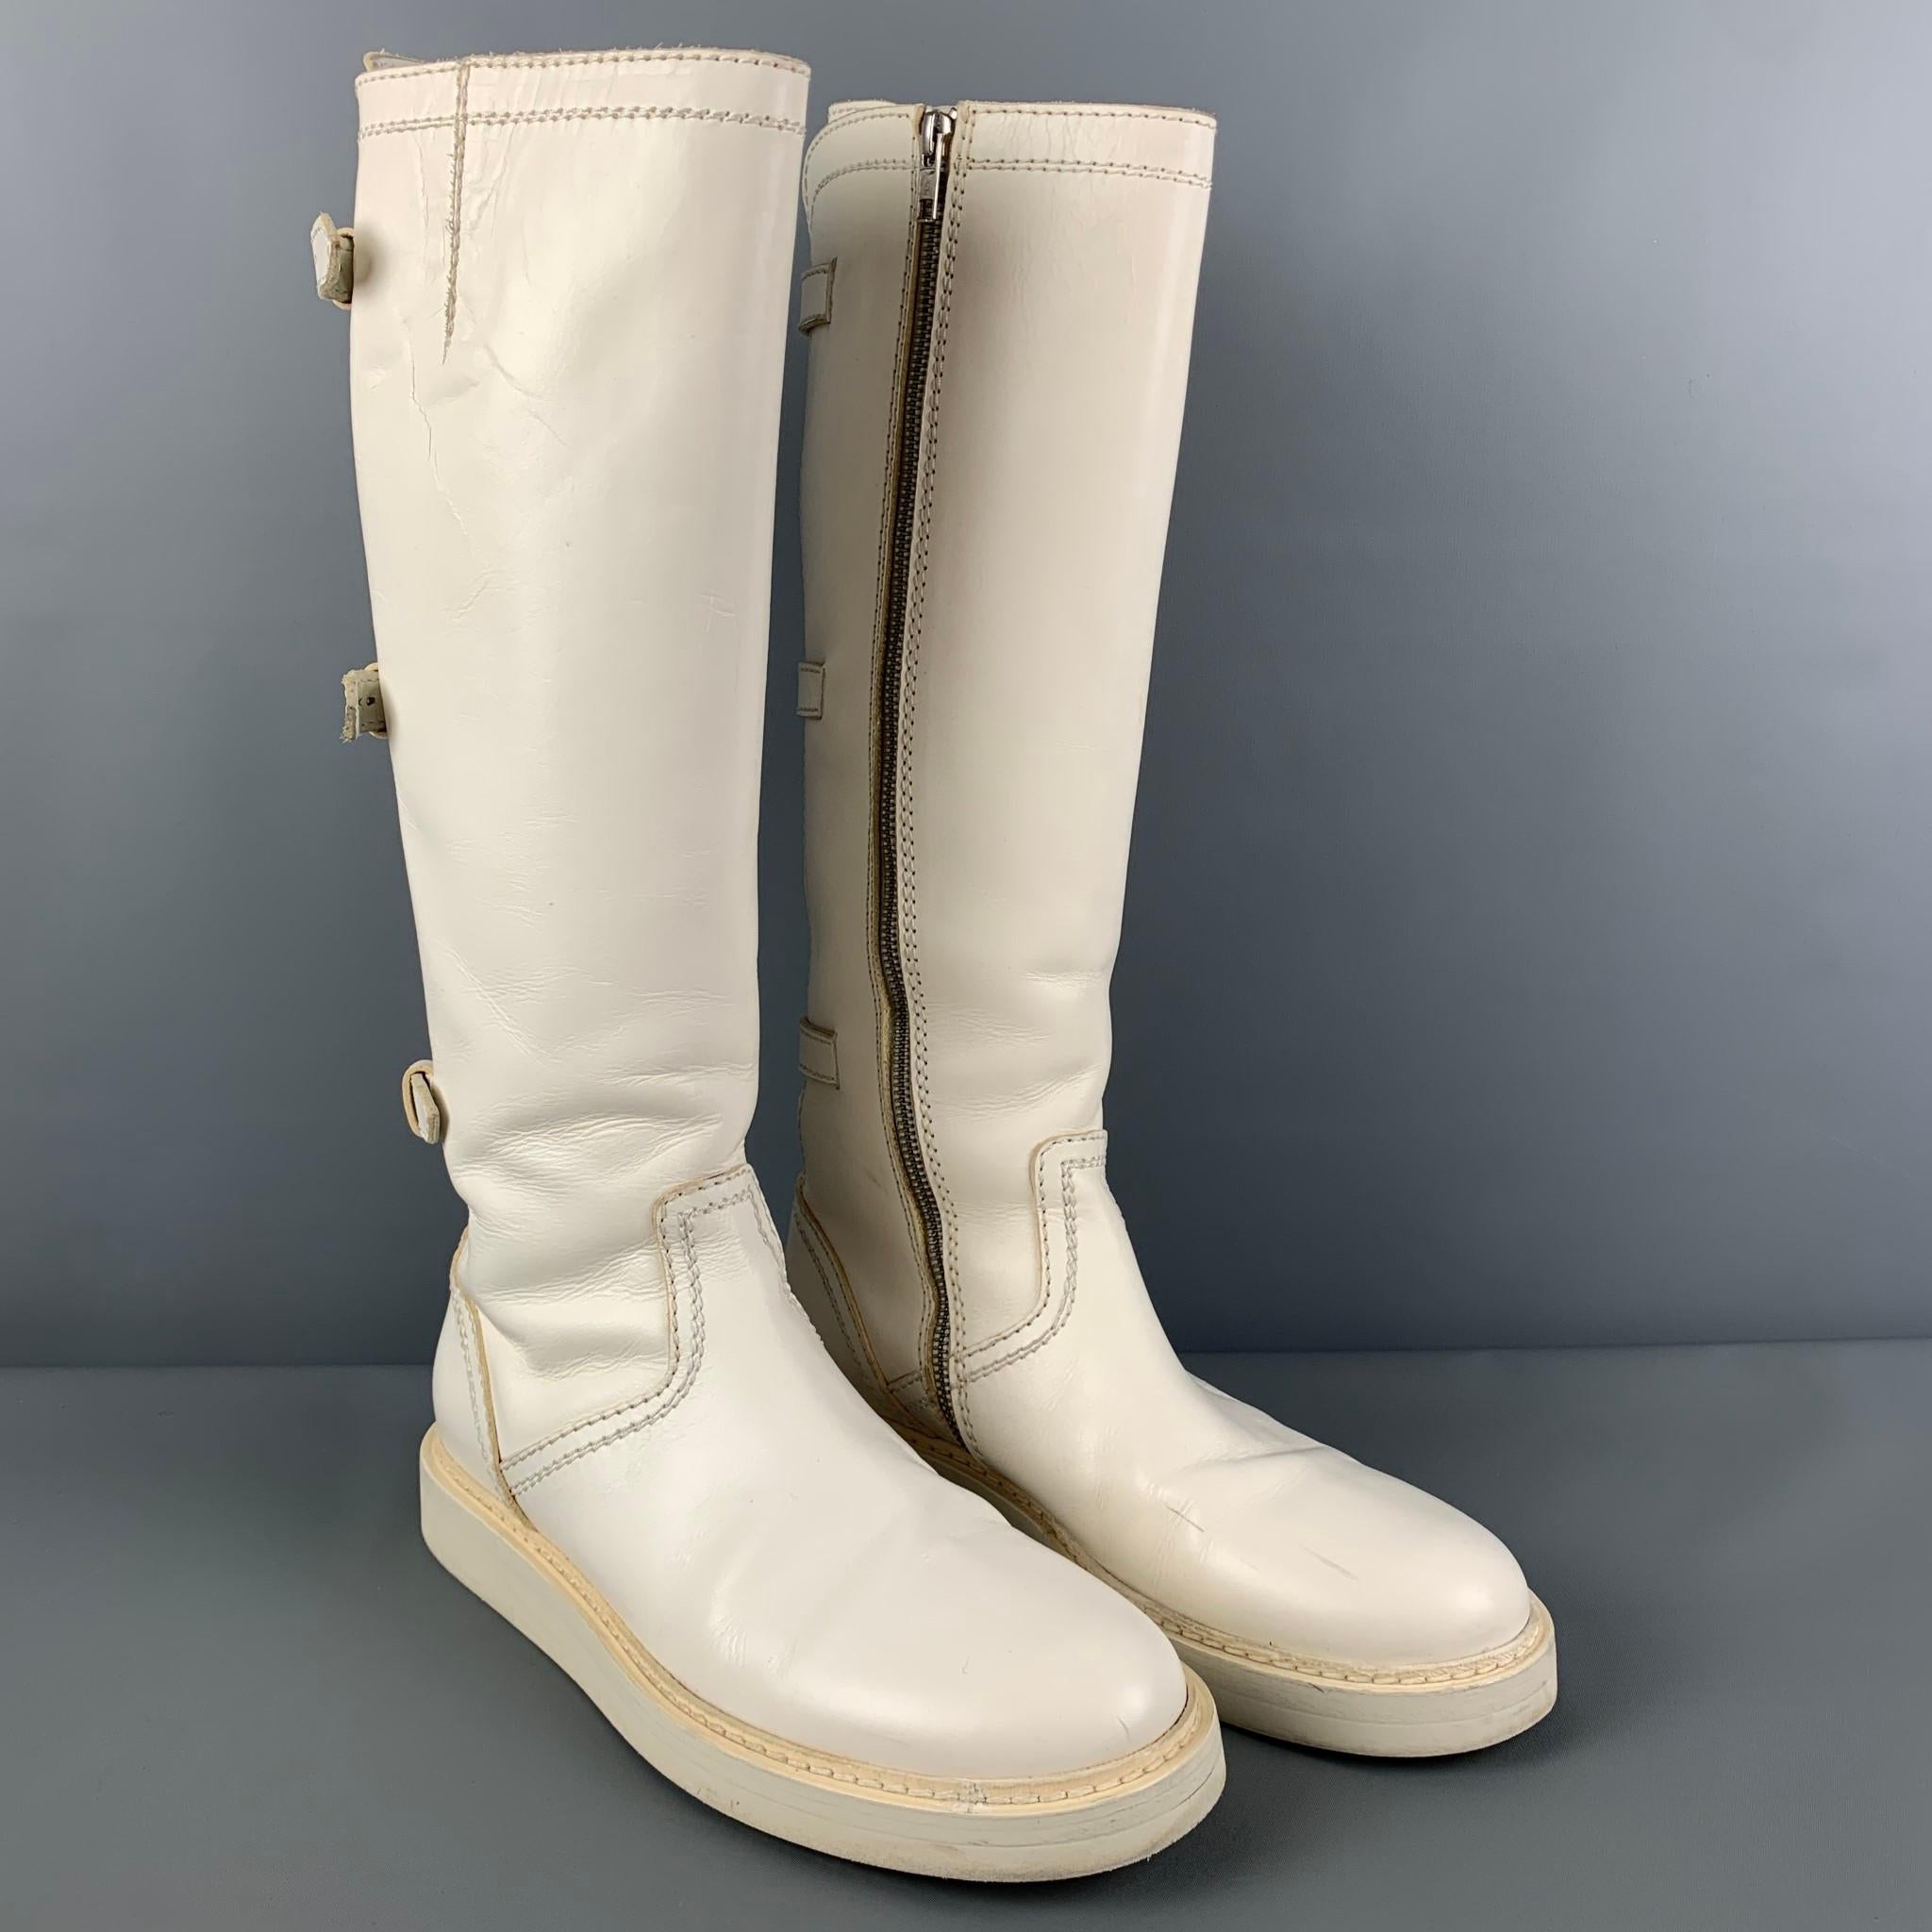 ANN DEMEULEMEESTER boots comes in a white leather featuring a round toe, knee high length, back strap details, and a side zipper closure. Made in Italy. 

Very Good Pre-Owned Condition. Light wear throughout. As-is.
Marked: